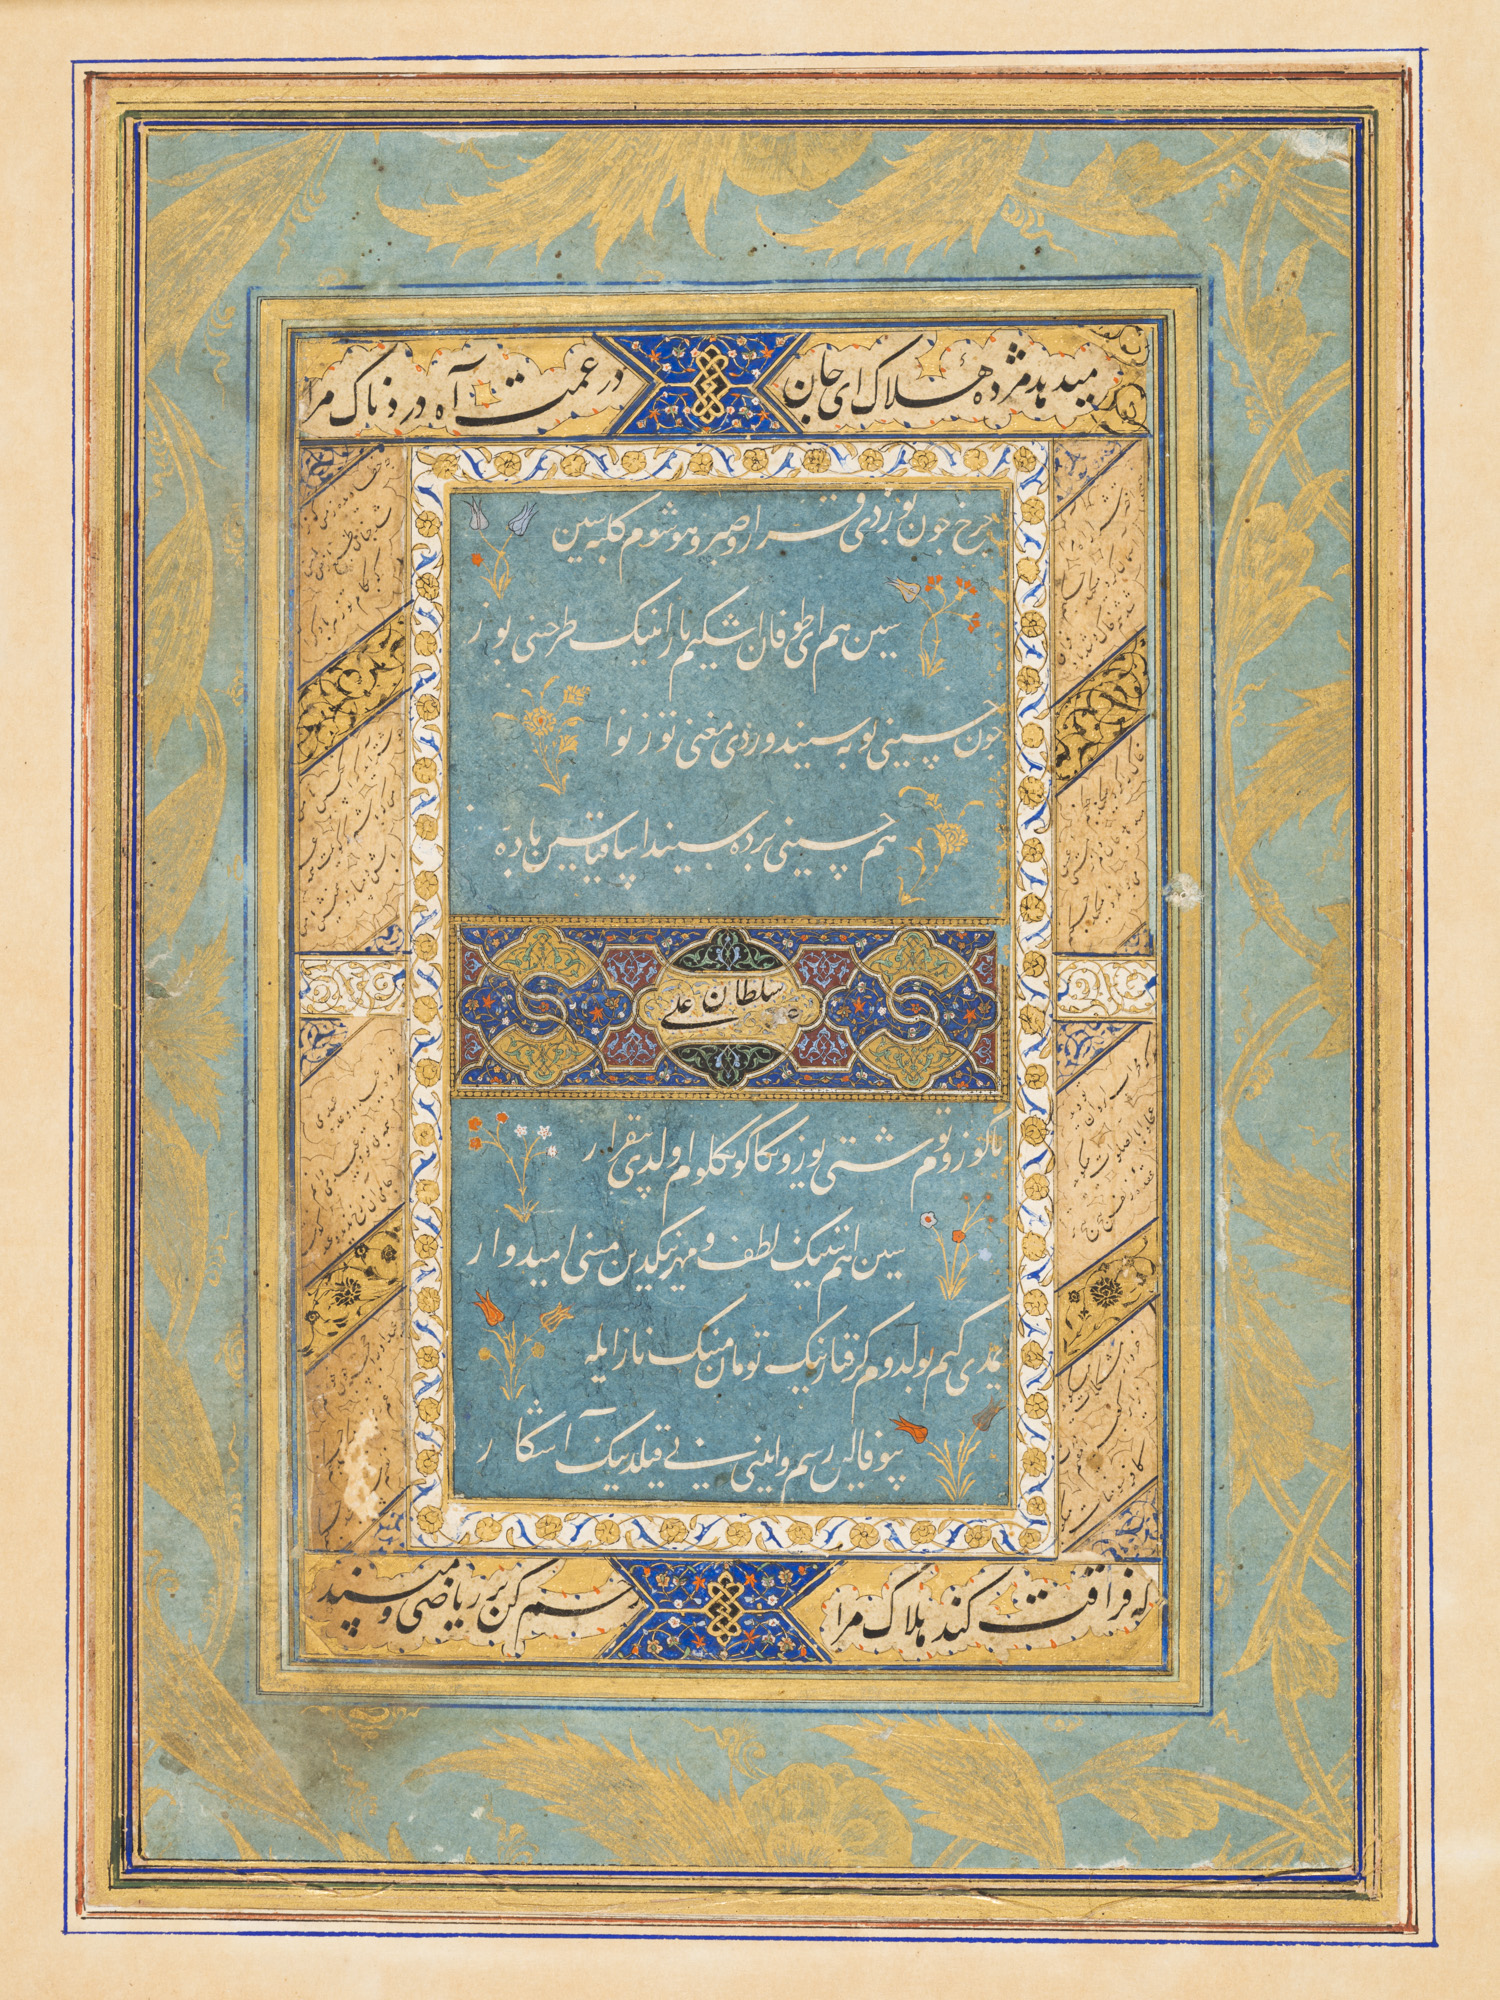 Folio Describing the Grief and Anguish Caused by the Unpredictable Circumstances of Love:  Page from a dispersed diwan (collected works) of poetry by Sultan Husayn Mirza Bayqara by Sultan Ali Mashhadi - ca. 1490 (Timurid period) - 15 5/16 in x 11 1/16 in Cincinnati Art Museum